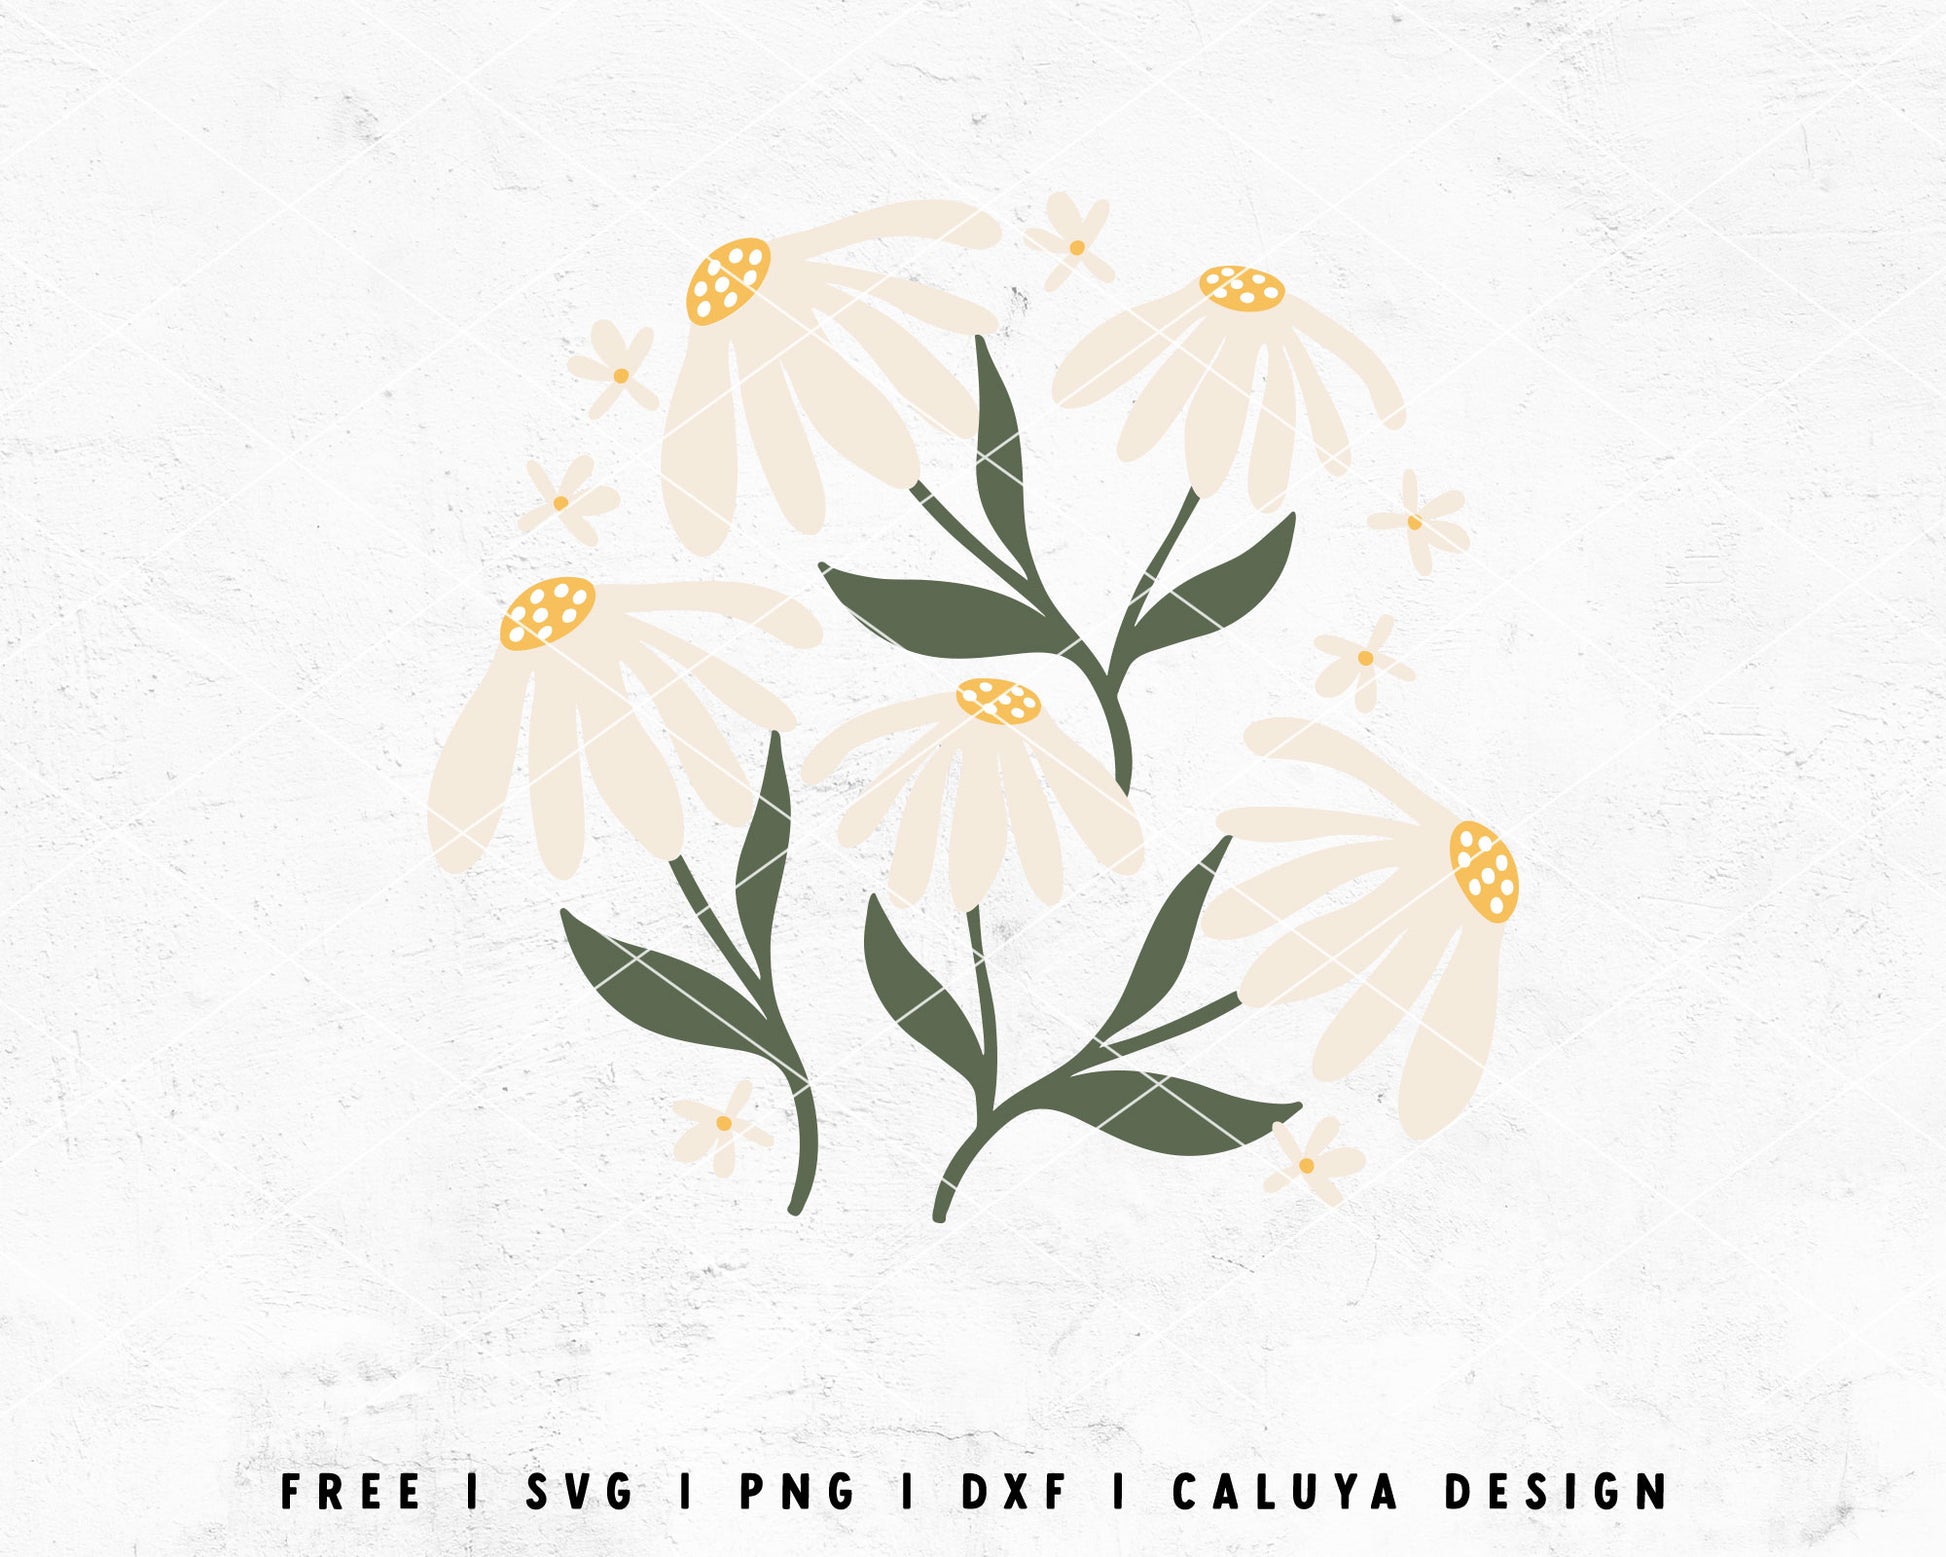 FREE Abstract Flower SVG | Daisy Flower Matisse SVG Cut File for Cricut, Cameo Silhouette | Free SVG Cut File